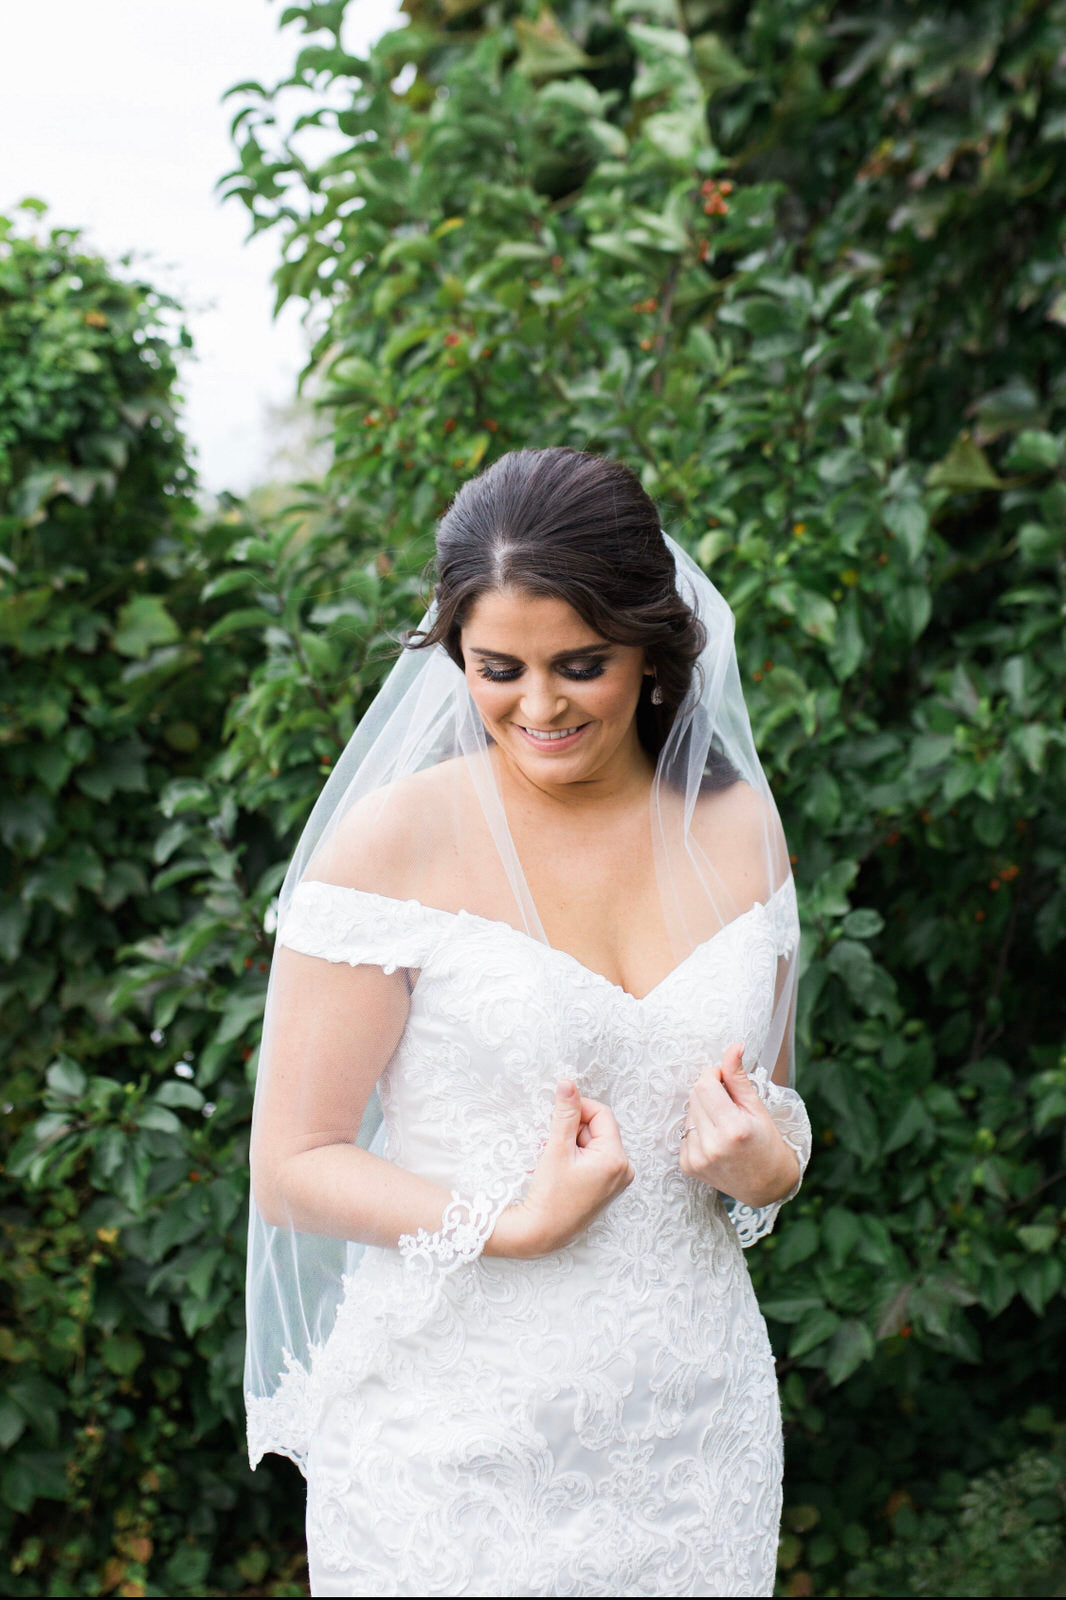 Fingertip Wedding Veil with Lace, Mid Length